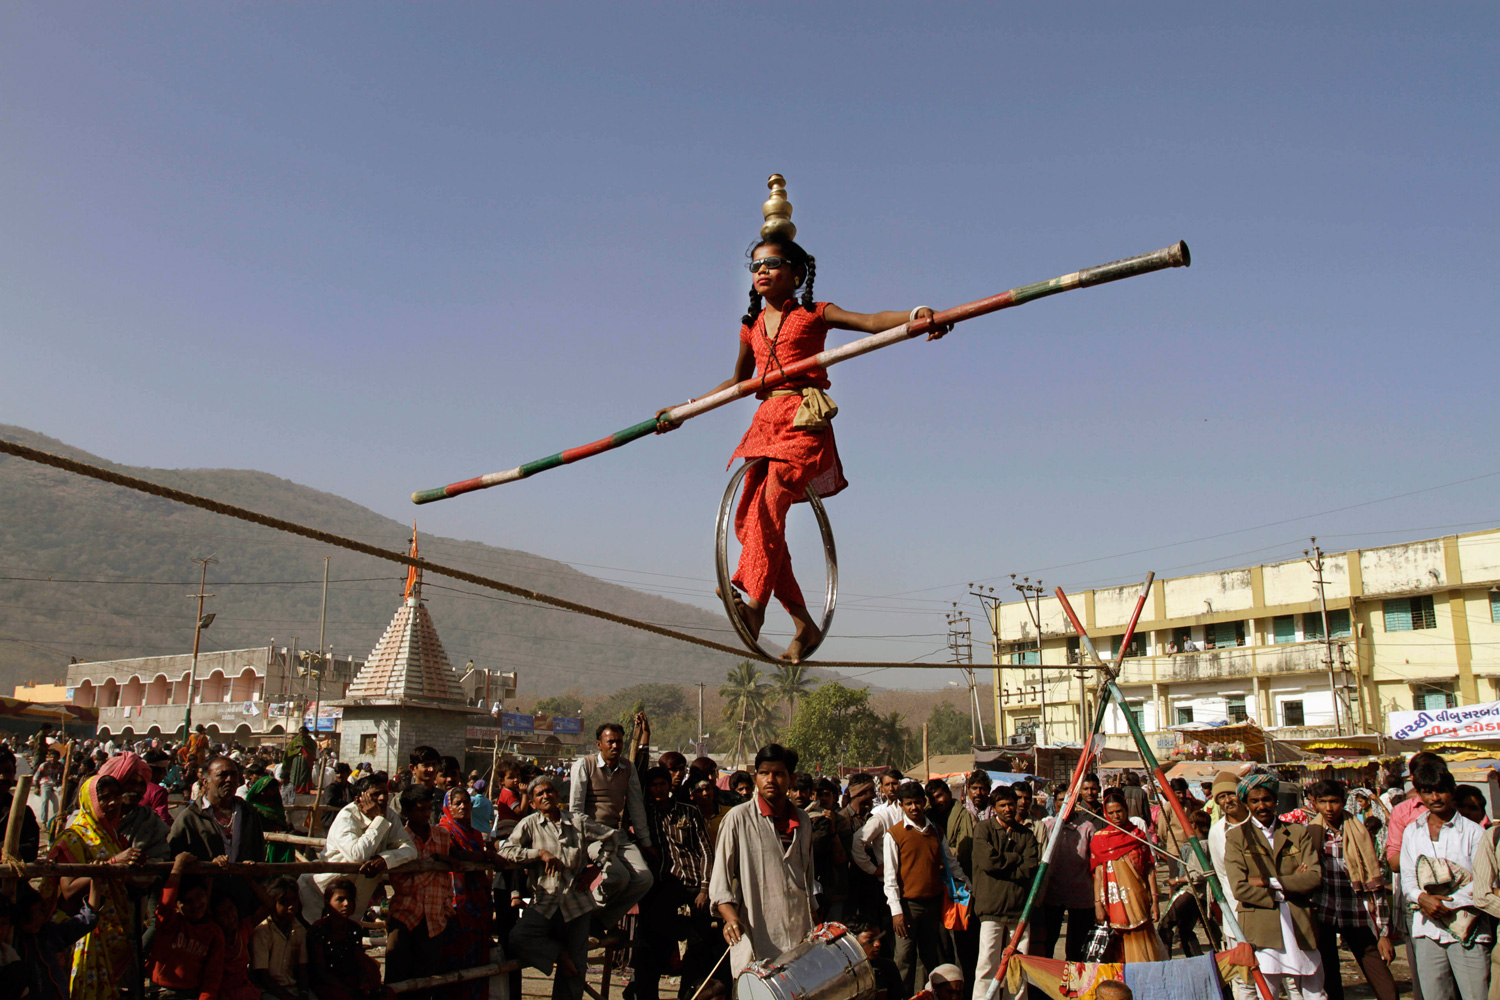 Feb. 20, 2012. An Indian girl performs acrobatic skills on a rope during Mahashivratri festival celebrations at Bhavnath temple in Junagadh, about 327 km (204 miles) from Ahmedabad, India.